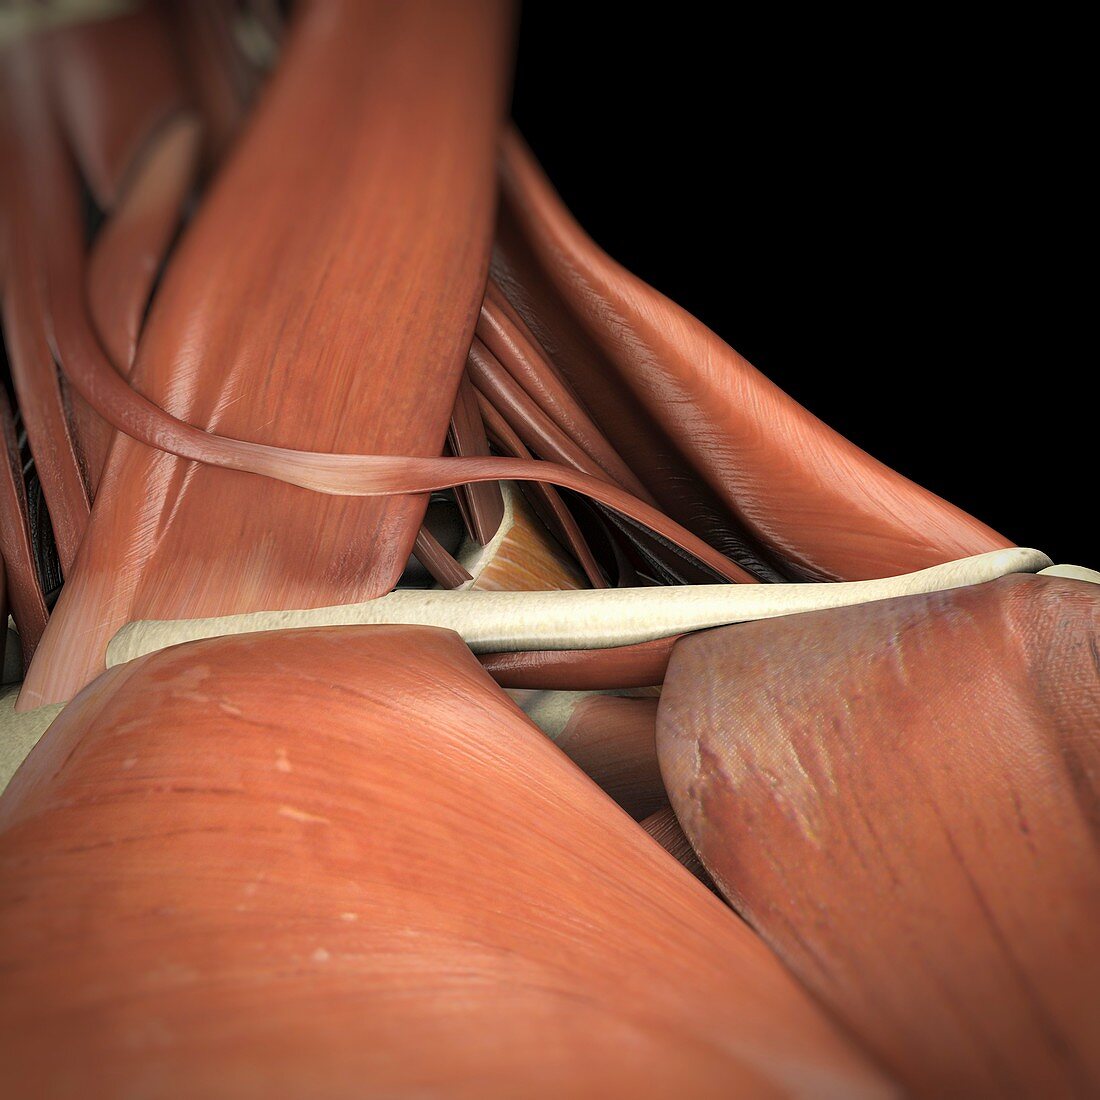 Muscles of the Clavicular Region, artwork